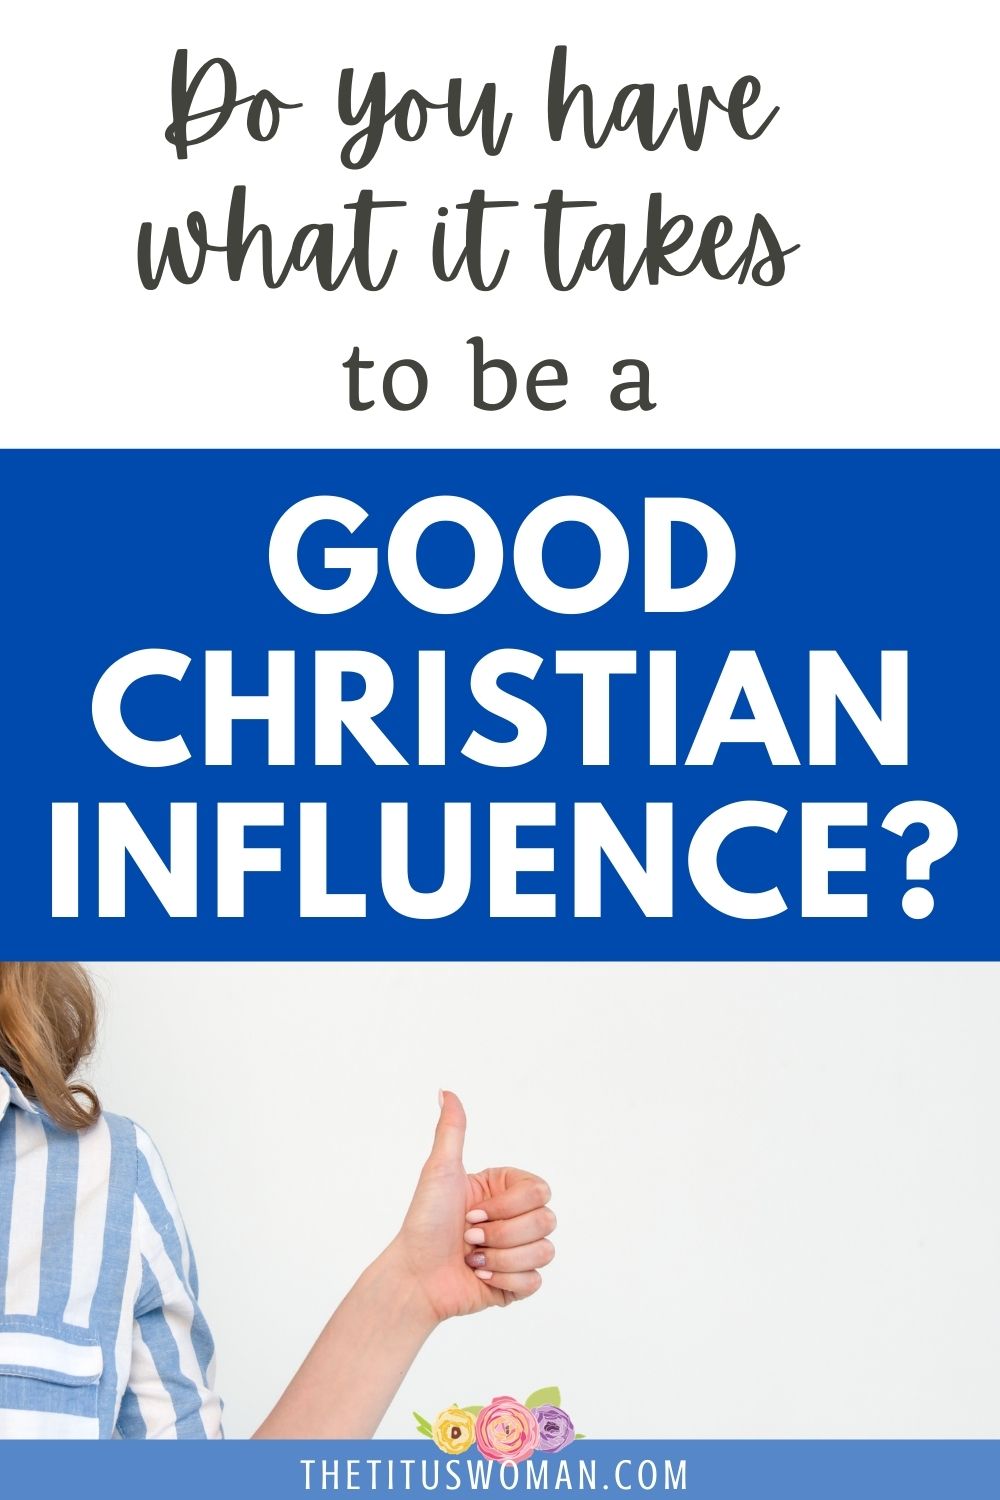 do you have what it takes to be a good Christian influence?